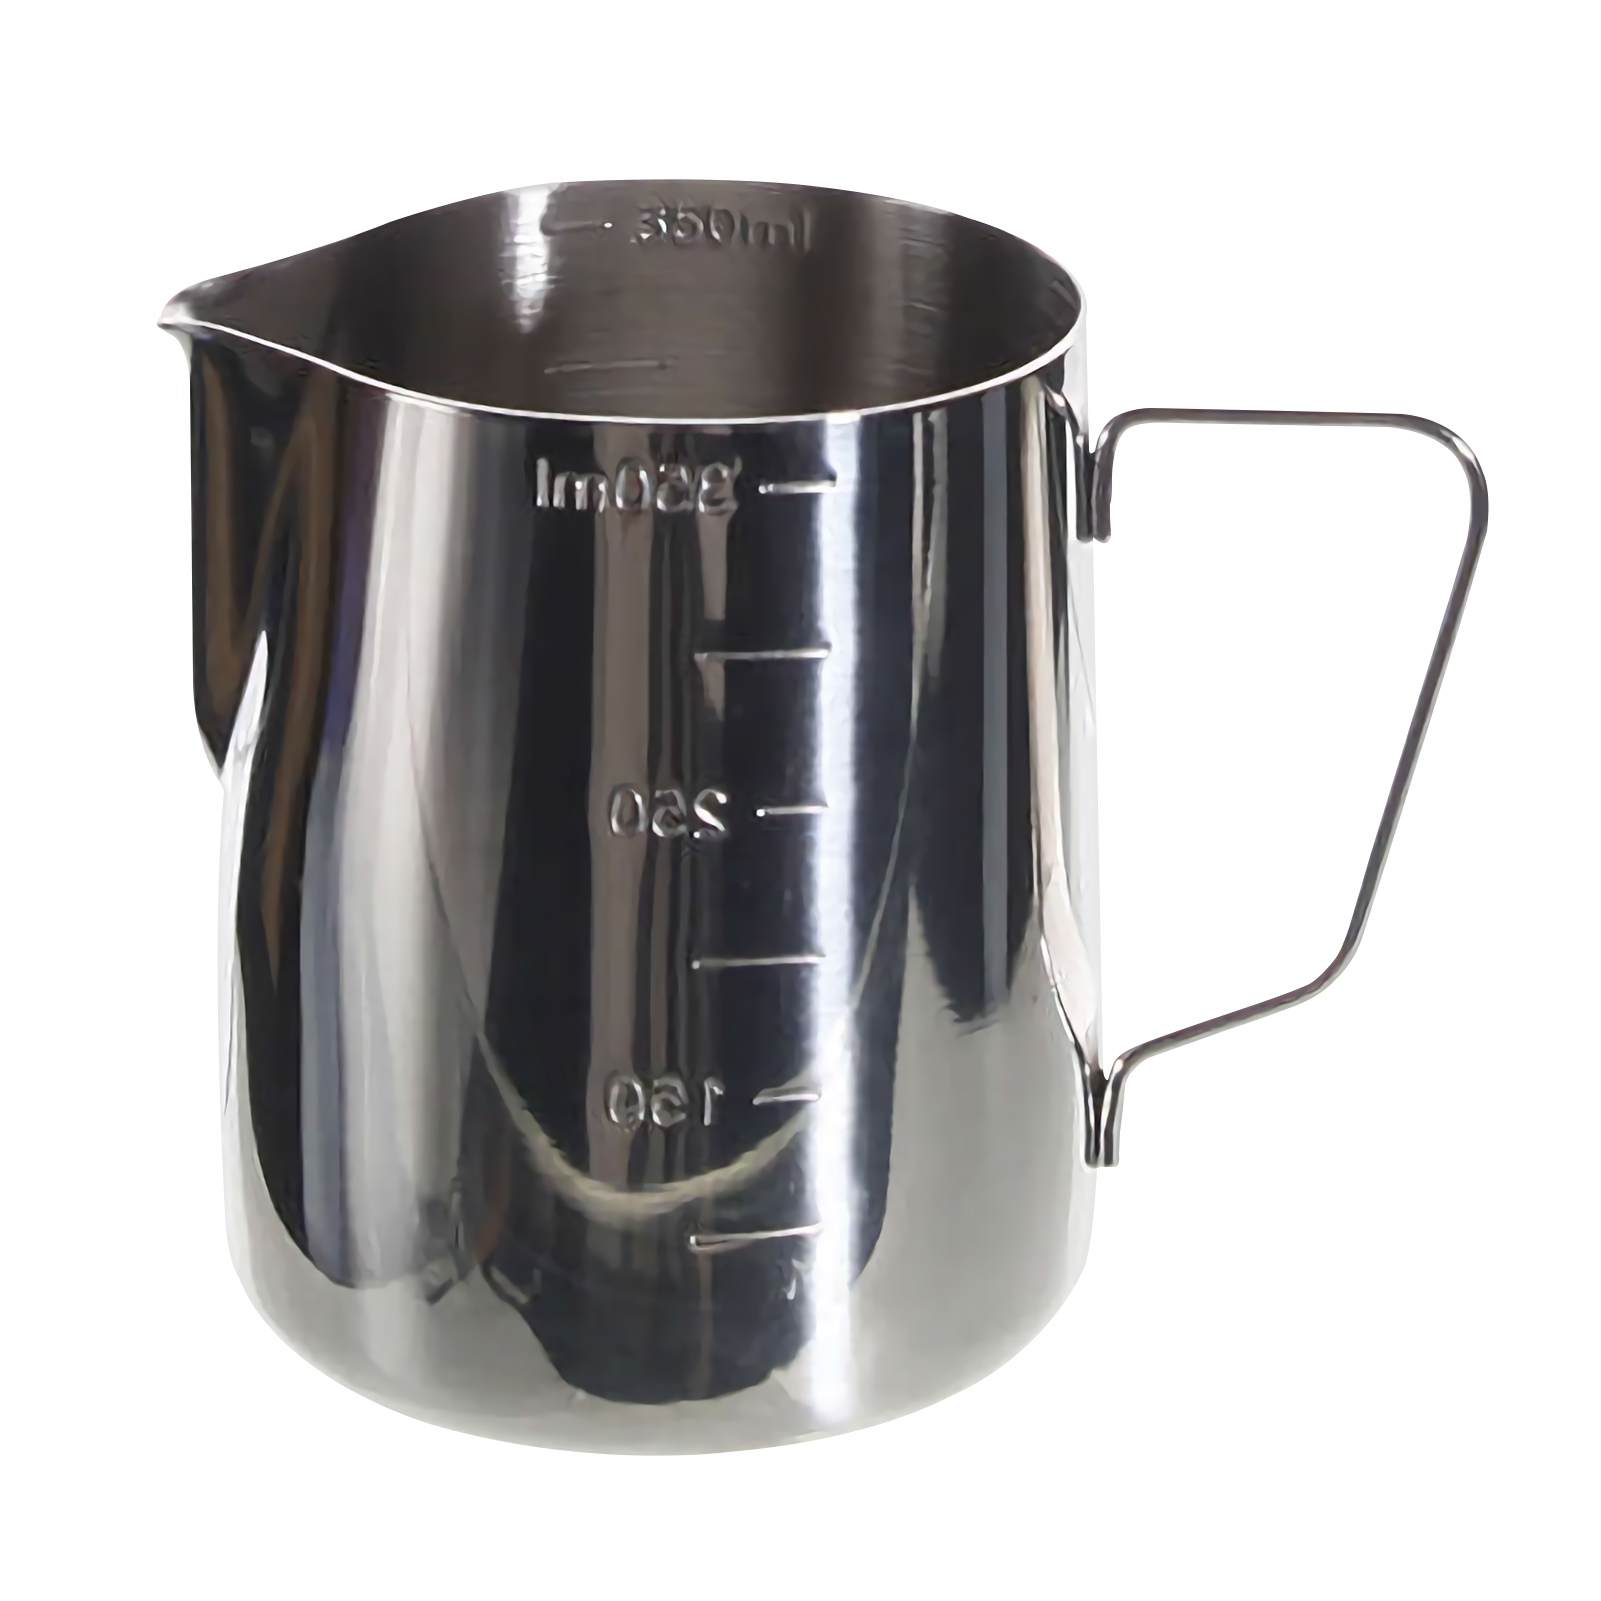 ADAMAS-BETA 304 Stainless Steel Measuring Cup Graduated Laboratory Beaker with Handle Olecranon Outlet 350-2000ML Large Capacity